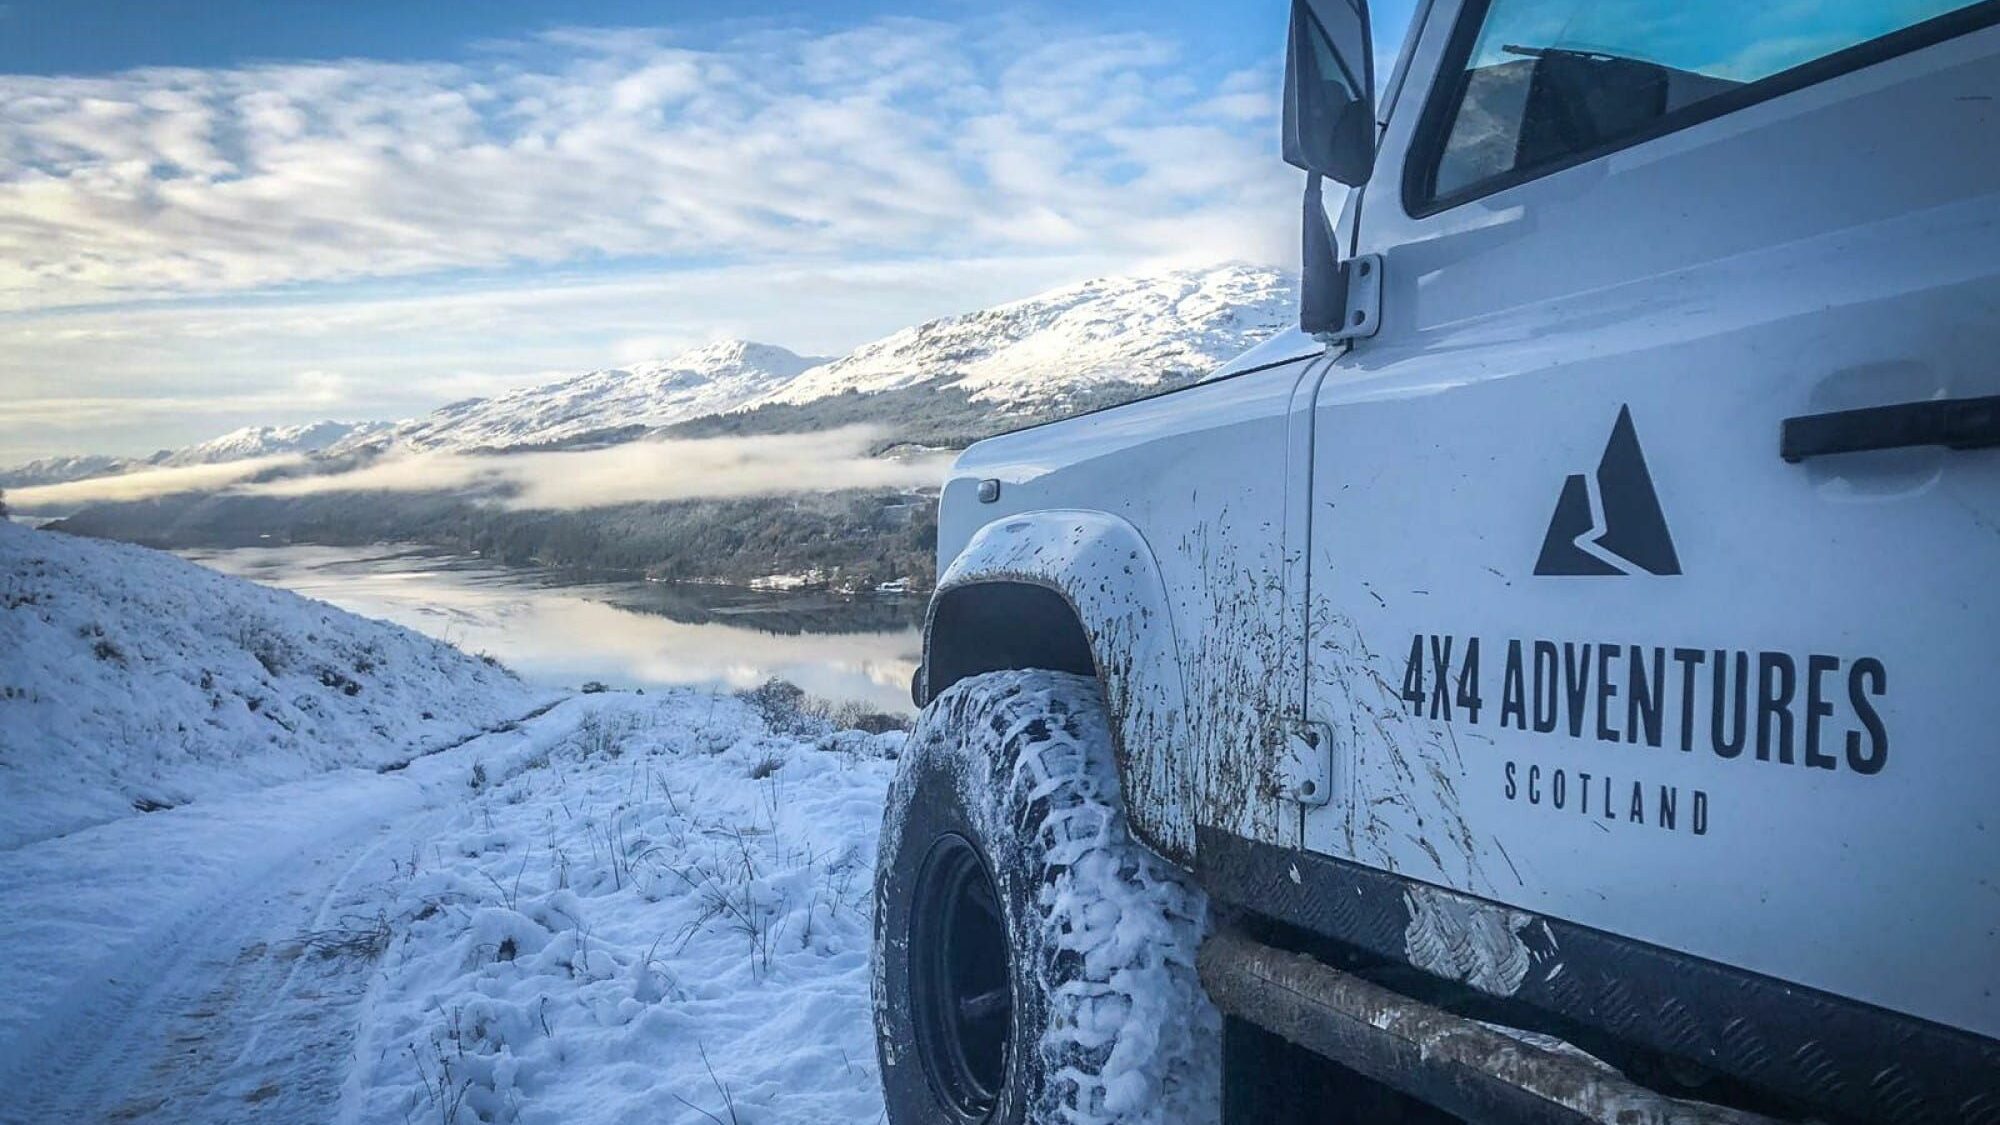 off-road driving car hire available to exlore the Highlands during Easter break at Loch Lomond